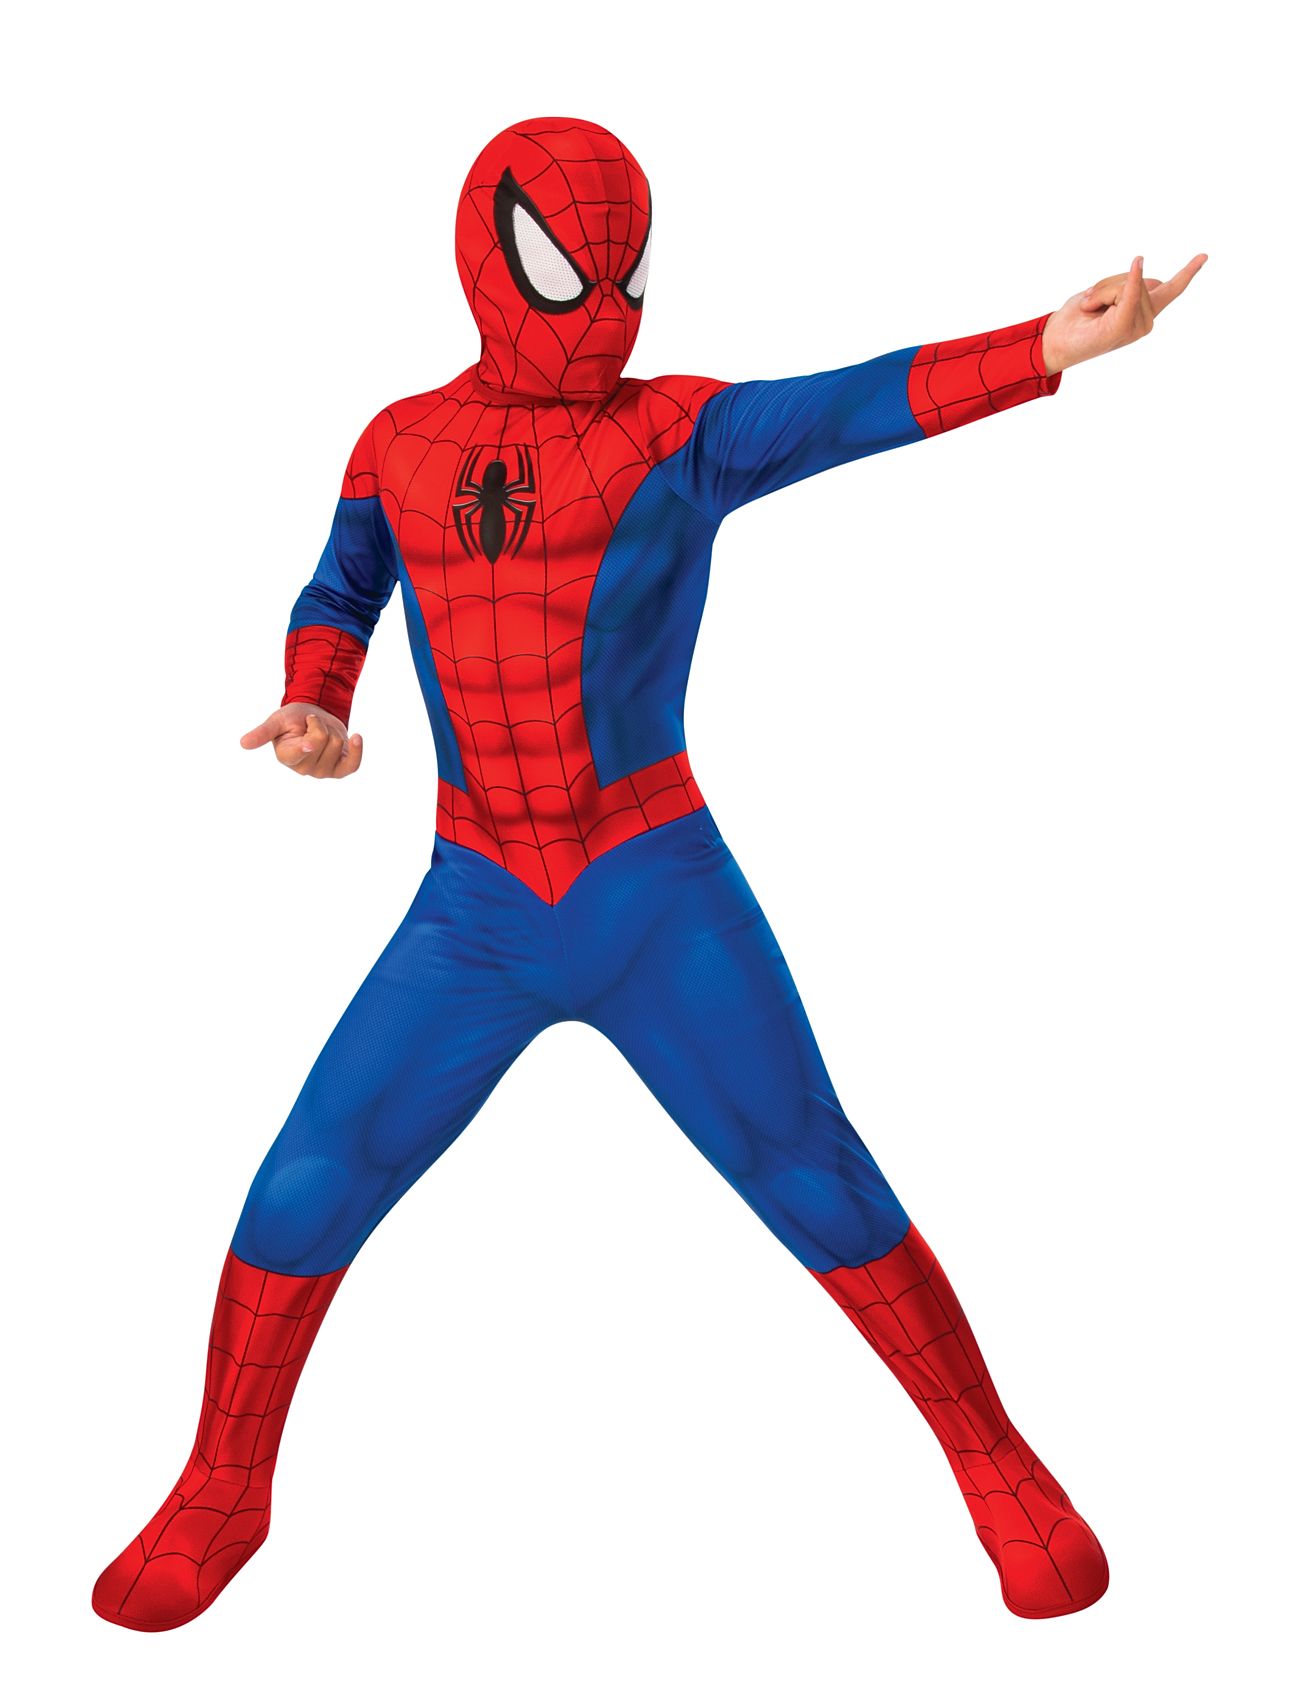 Costume Rubies Spiderman Classic Toys Costumes & Accessories Character Costumes Multi/patterned Spider-man